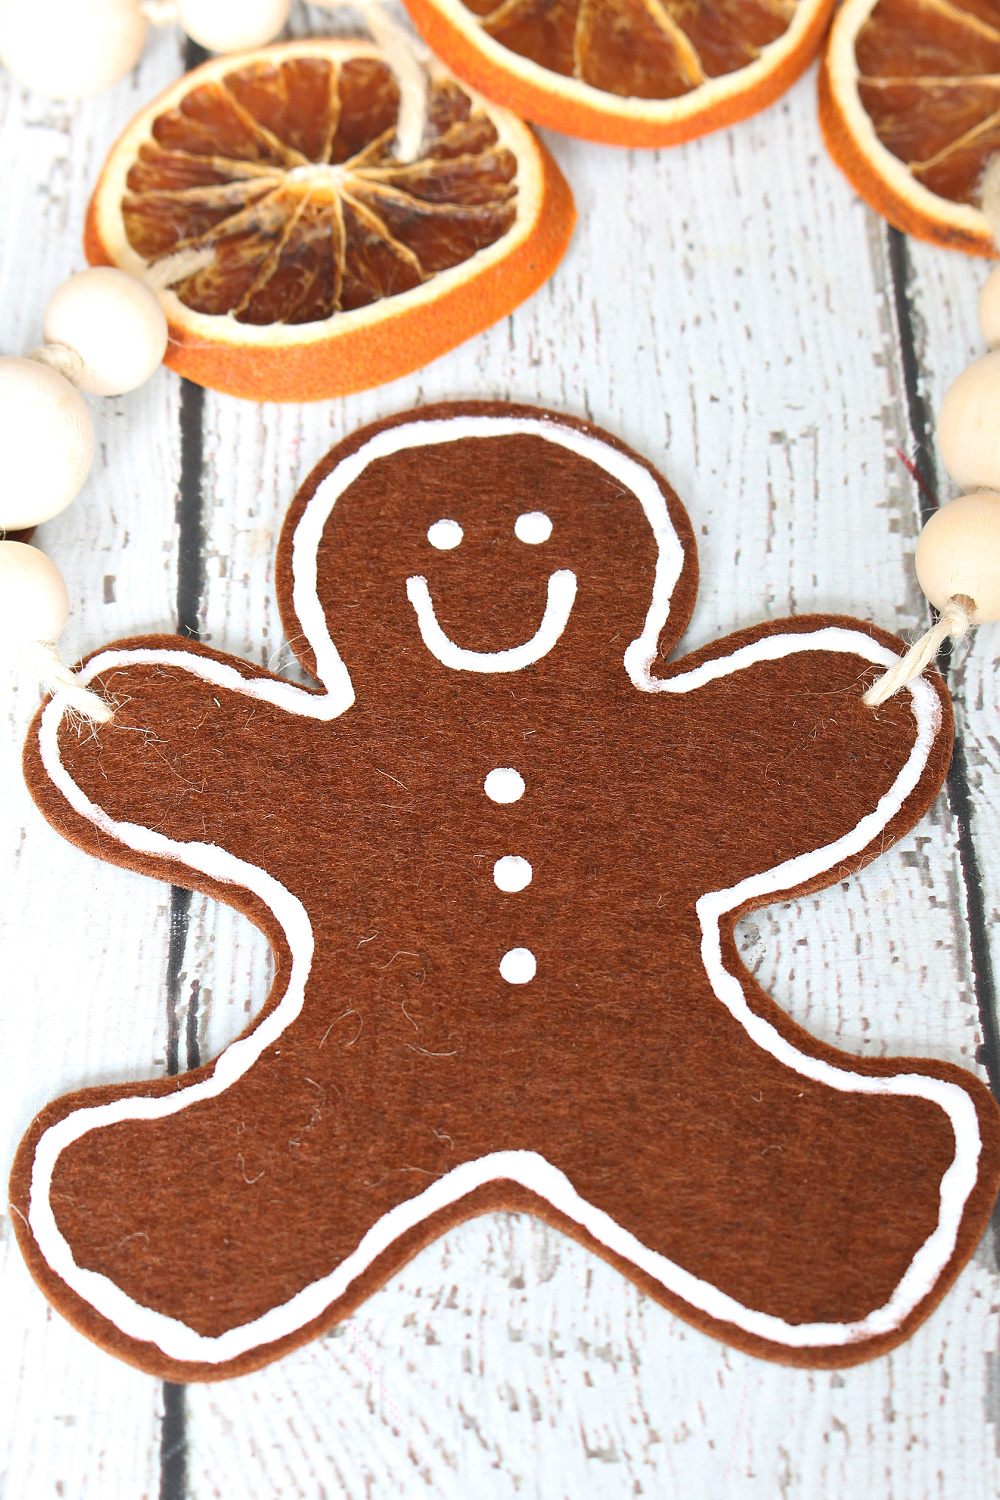 Cute DIY felt gingerbread man garland with dried oranges and wood beads.